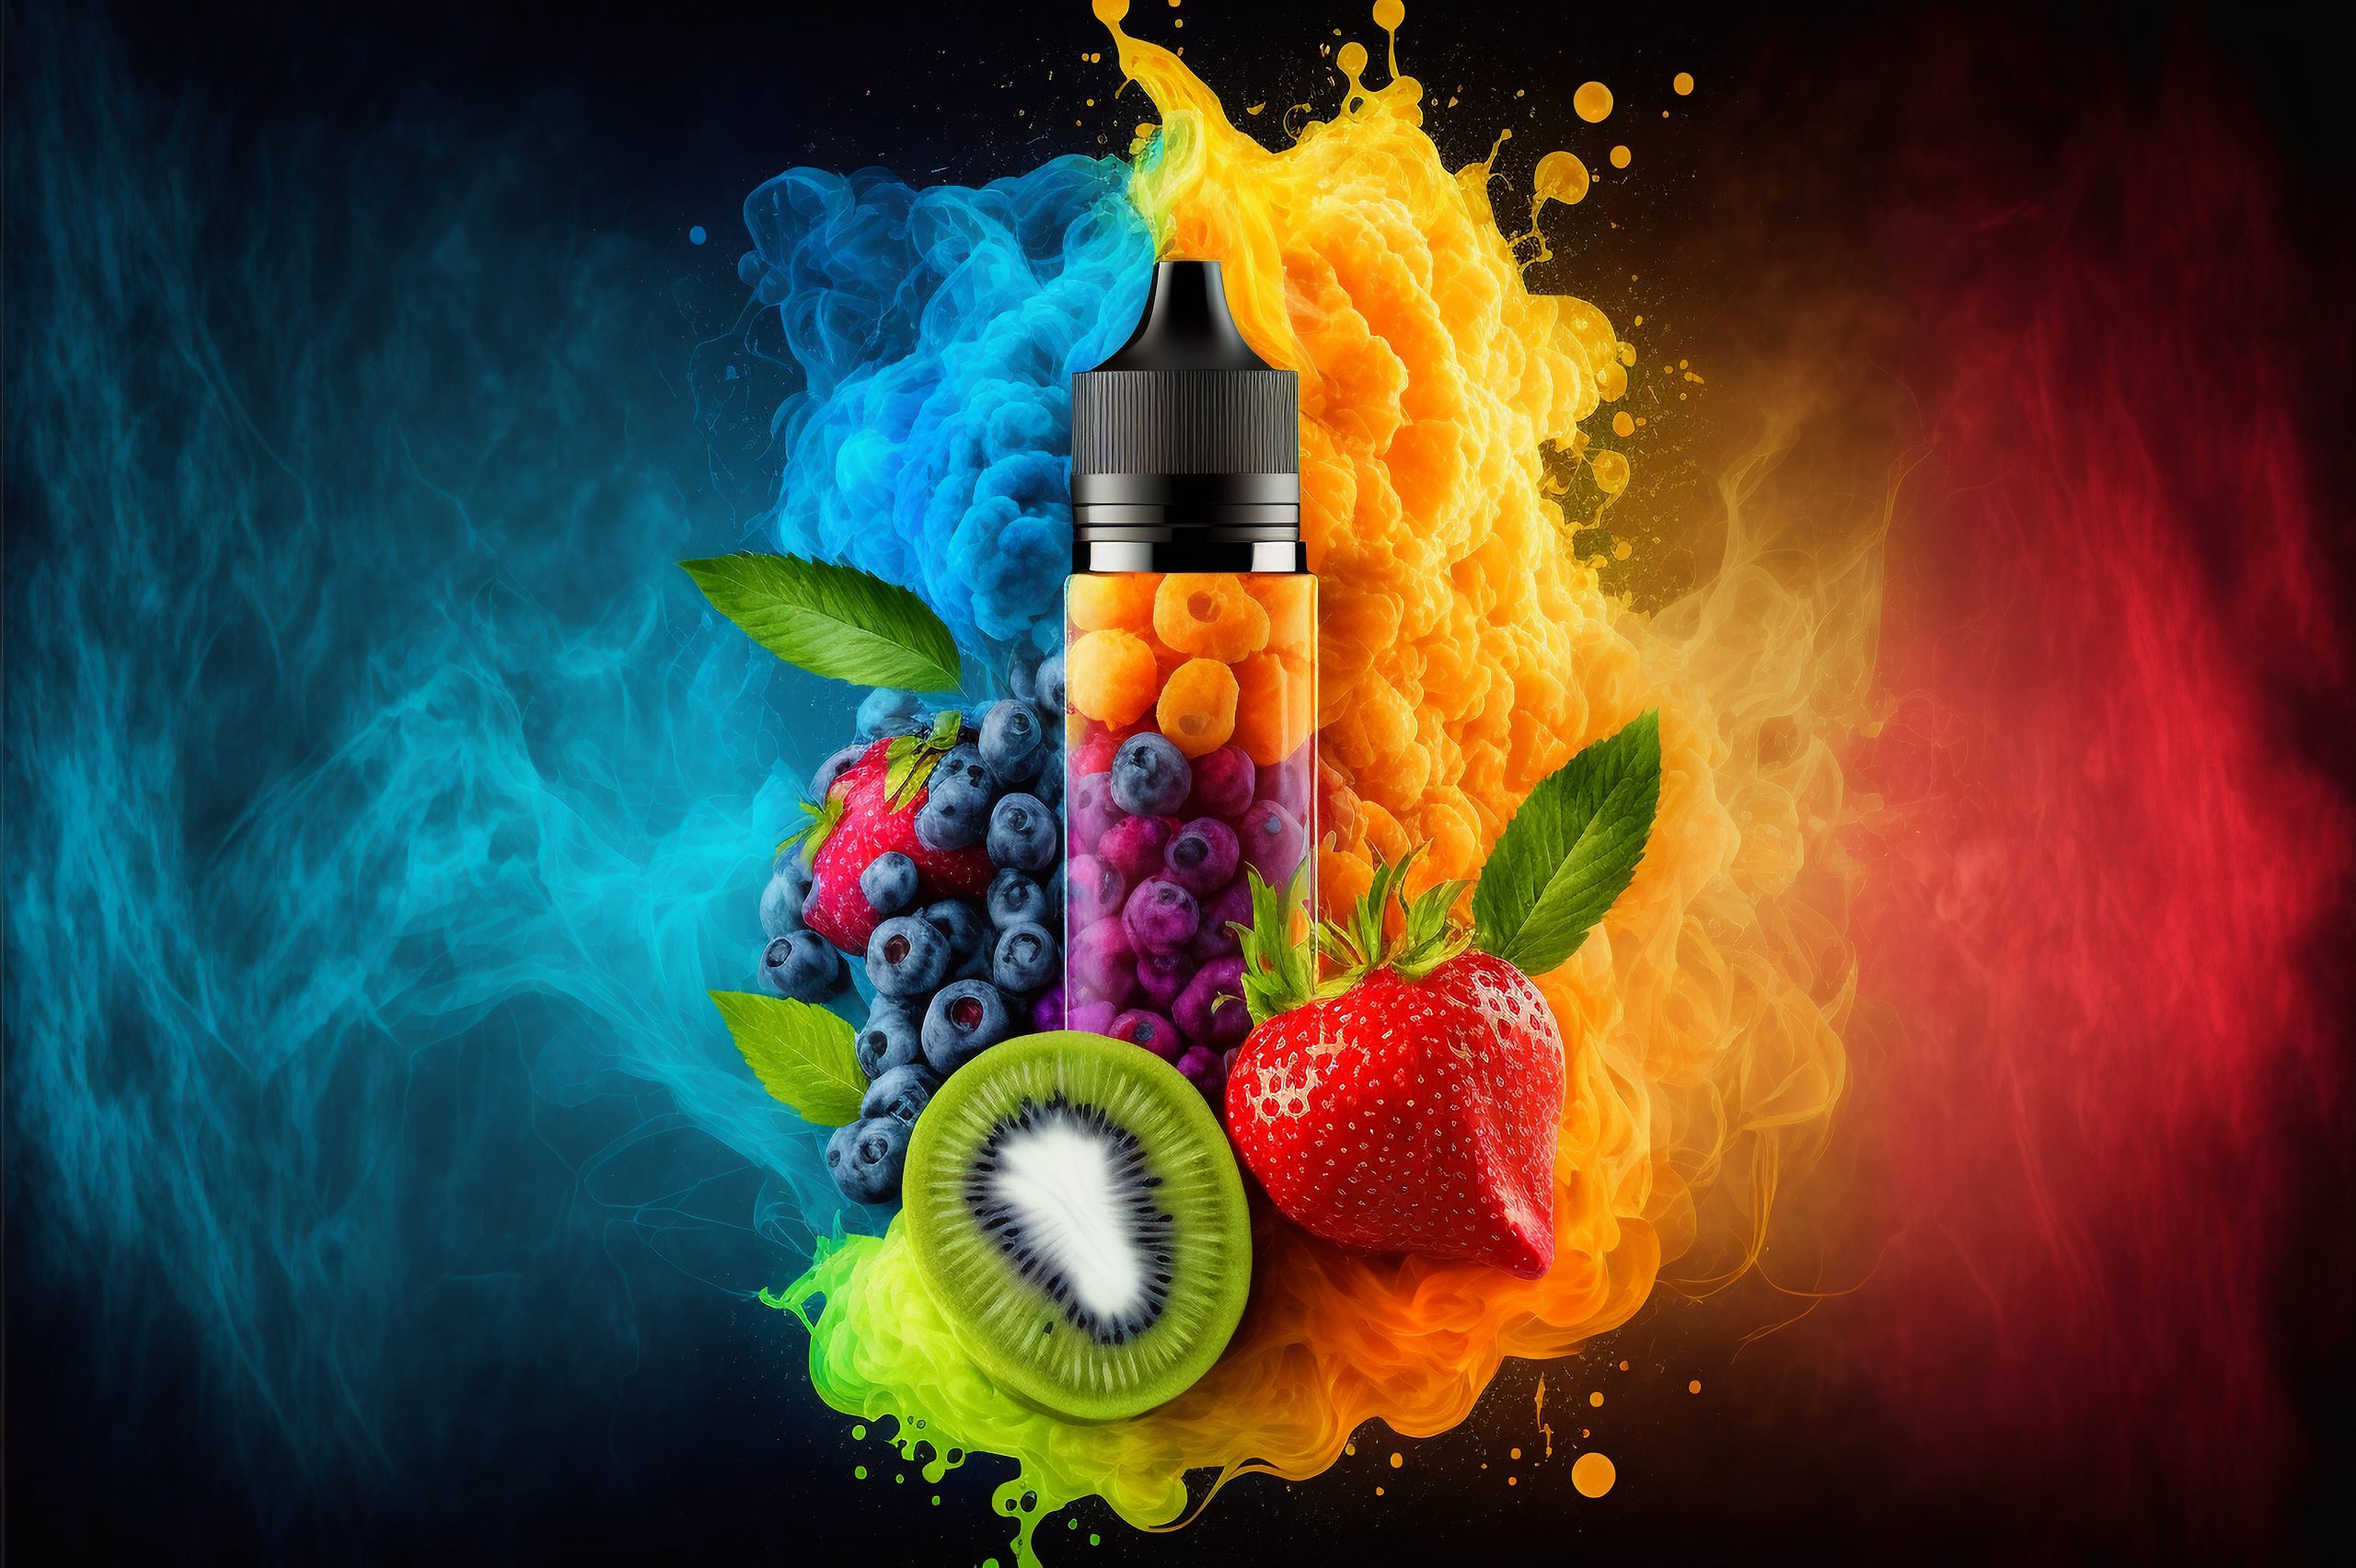 Colourful background wallpaper featuring, strawberries, kiwids, blueberries and other fruits around and inside a clear vape liquid bottle